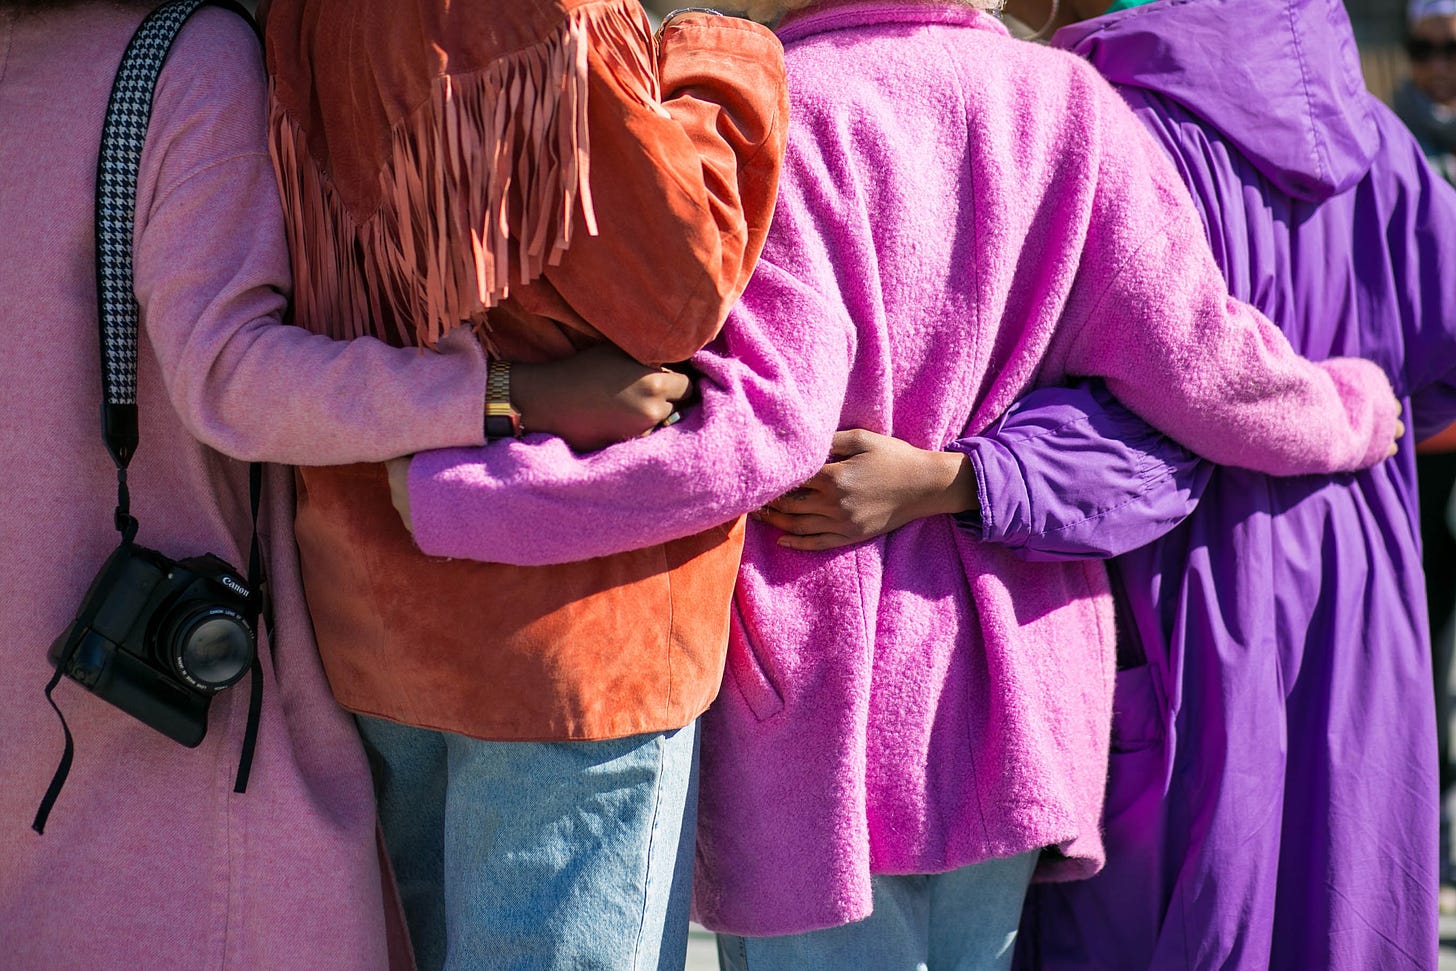 A group of four people wearing colourful jackets stand arm in arm